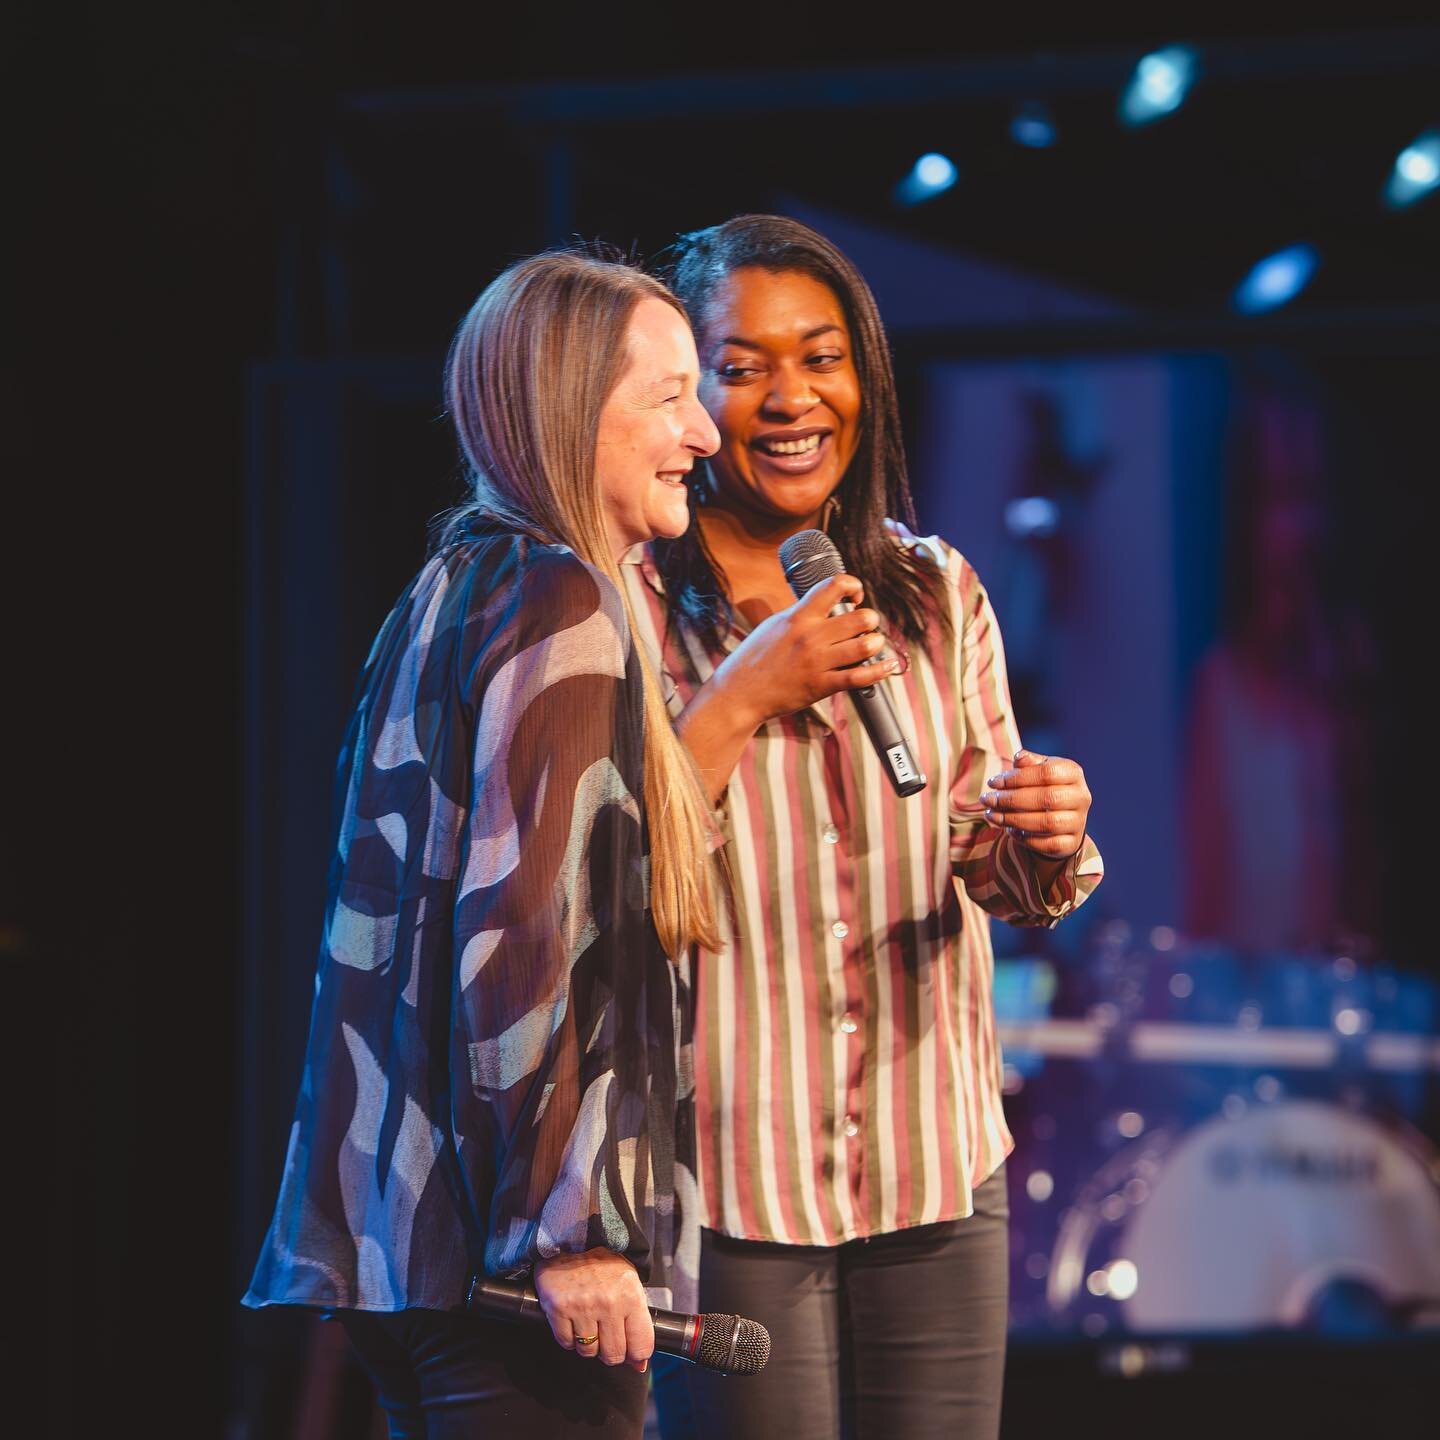 Pastor Sharon @sharon_melfi Thank you for all you do as a leader, pastor and the mother of the house. You&rsquo;re a role model, influence, hero and mum to so many at Citygate and beyond. We love and honour you. From Citygate family.